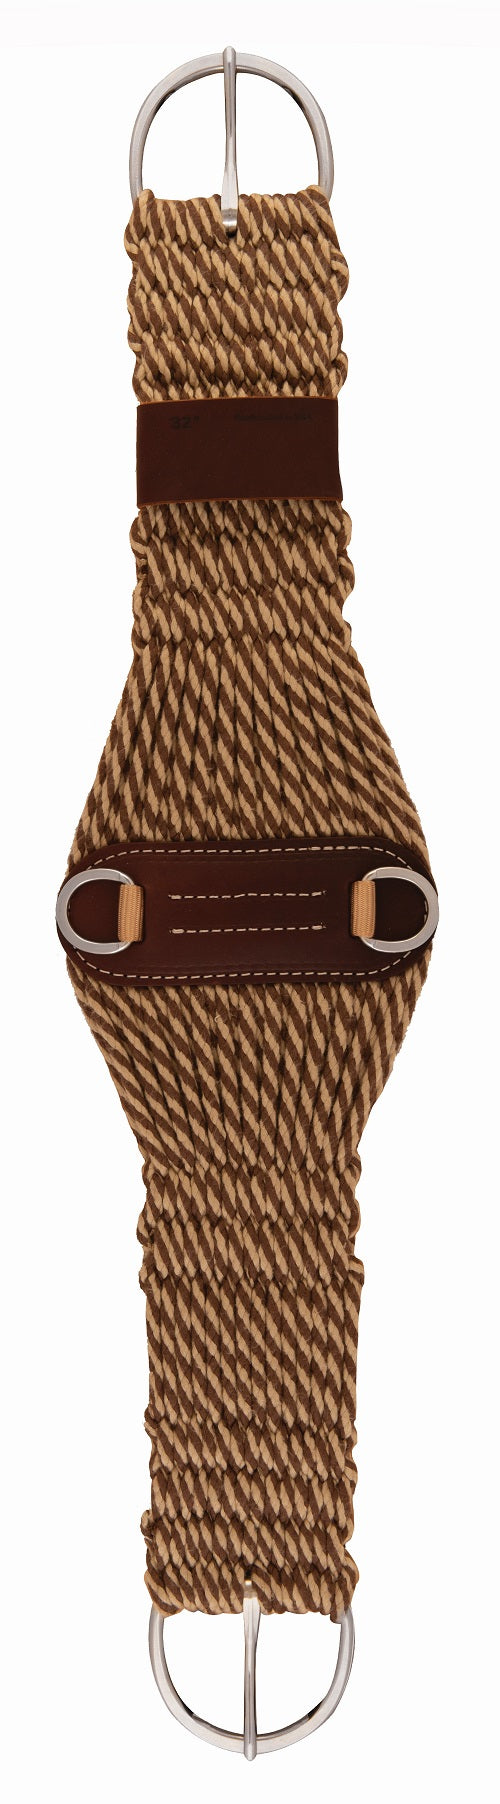 Weaver Leather Bamboo Ecoluxe Horse Equine 27 Strand Roper Cinch